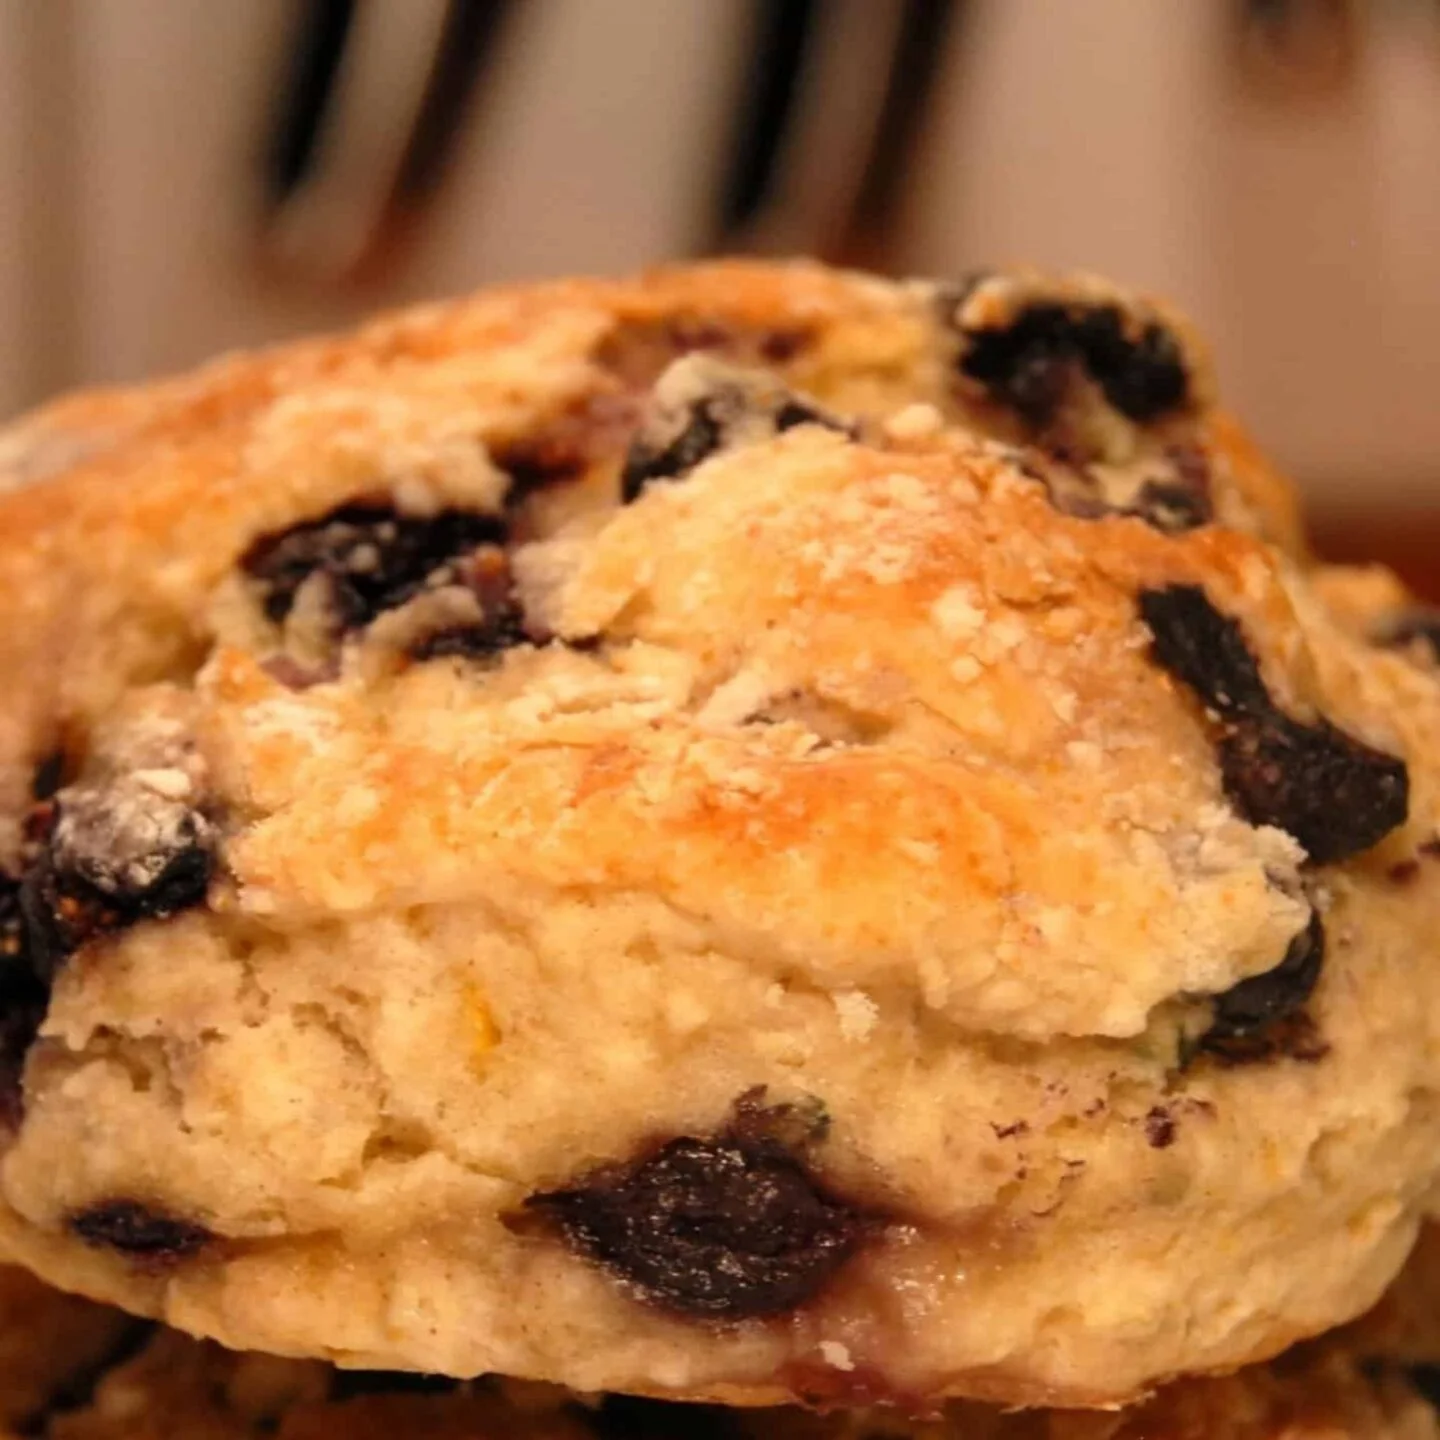 8. Blueberry Biscuits